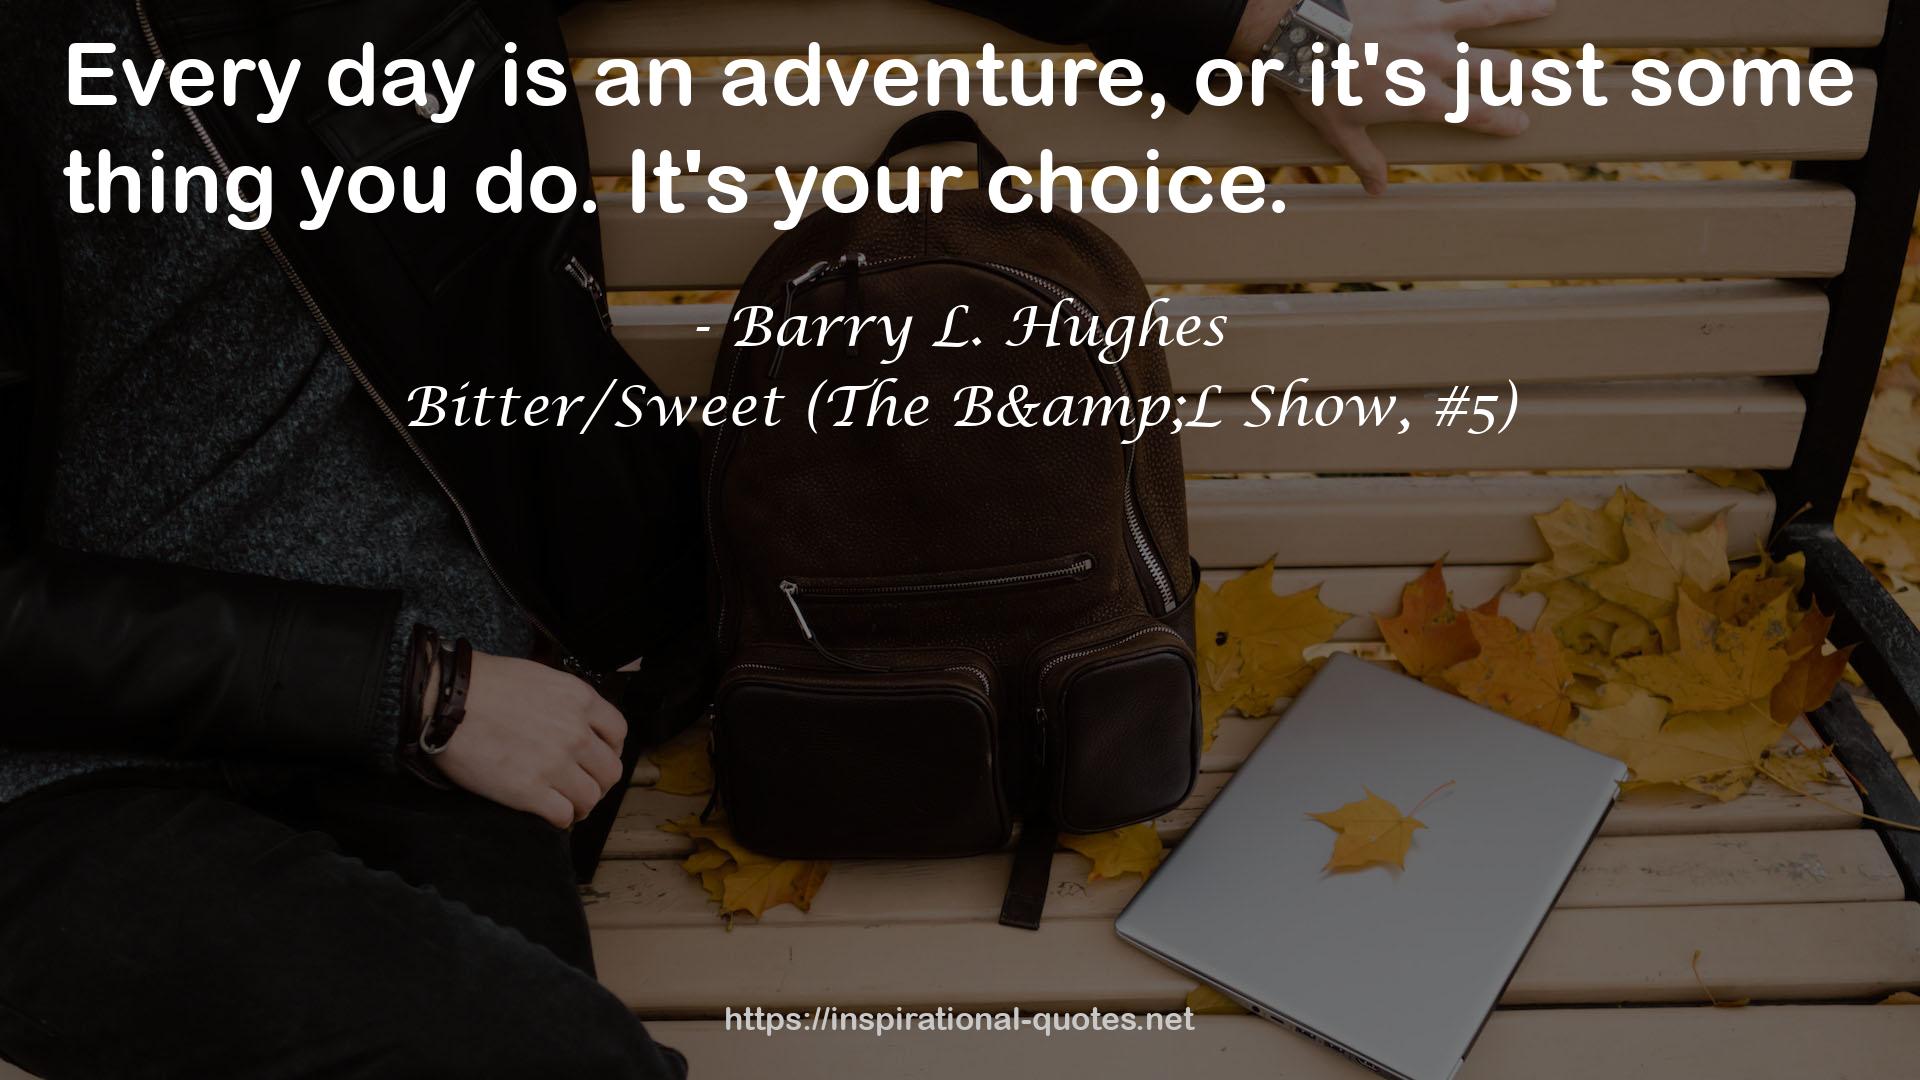 Bitter/Sweet (The B&L Show, #5) QUOTES